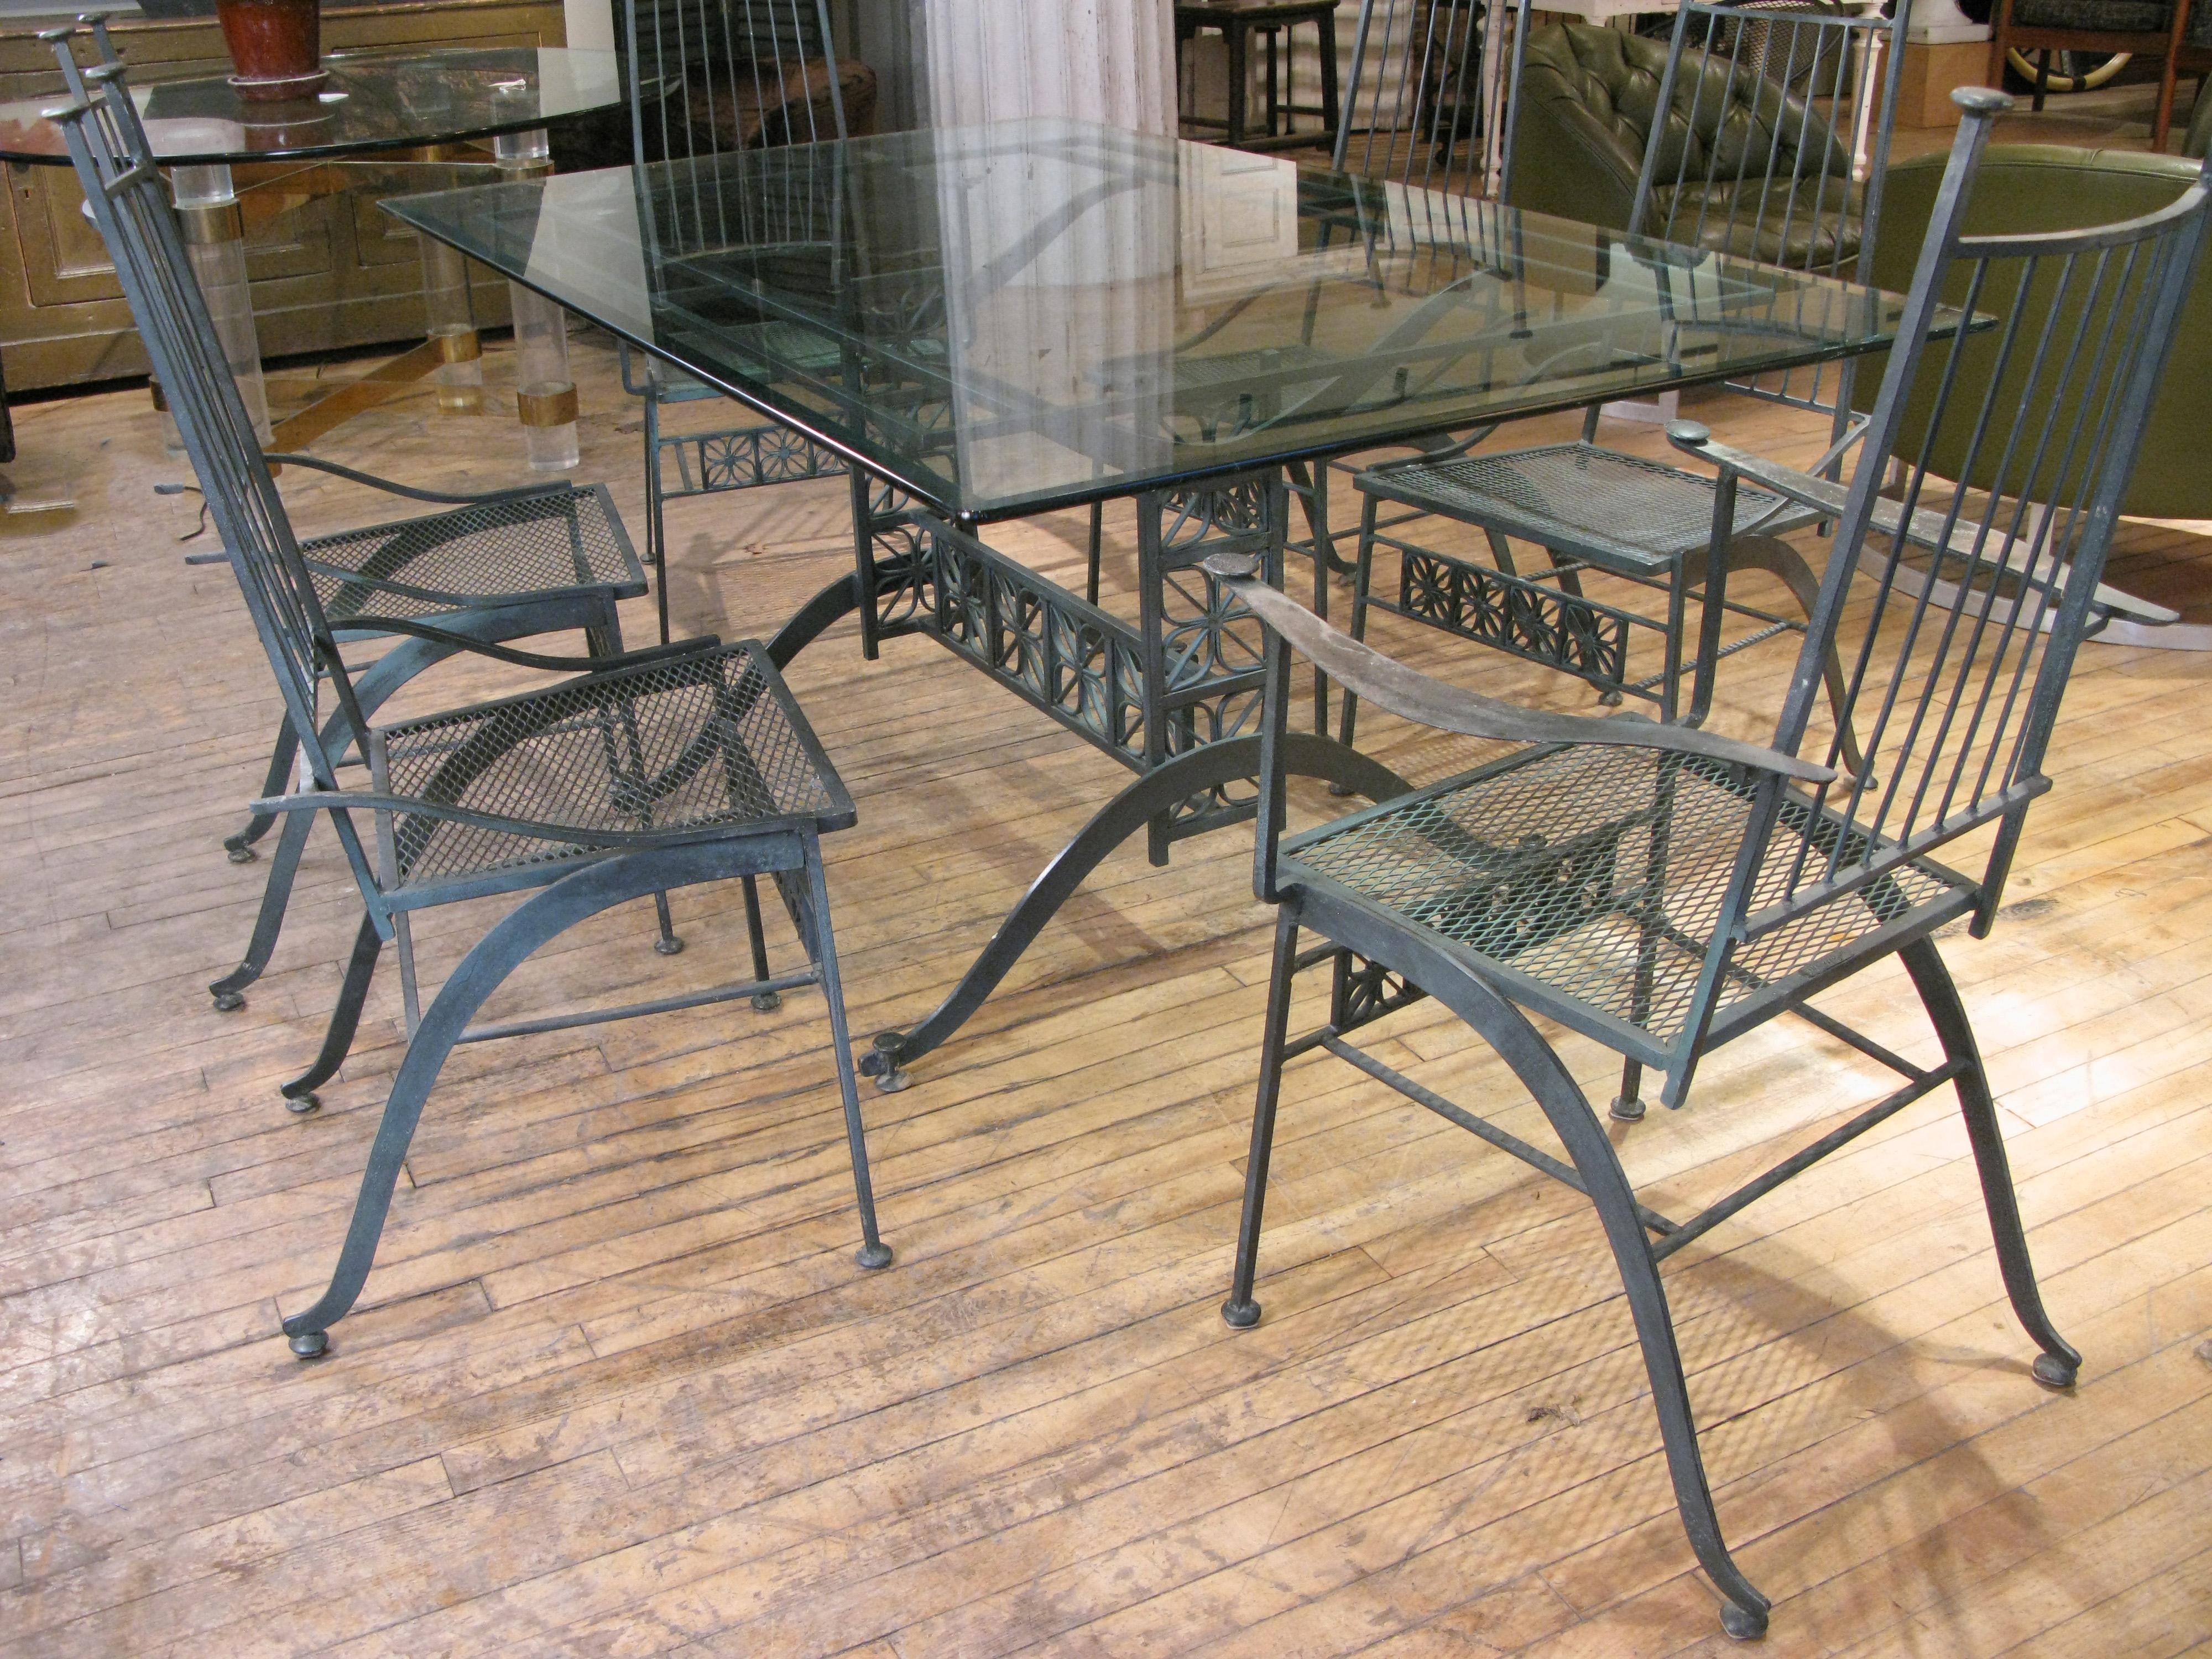 A very rare El Prado dining table and set of six chairs by Salterini, circa 1950s. This is one of their most beautiful series, with very low production. the wrought iron frames with curved legs, flat orb finials and feet, and the El Prado stylized